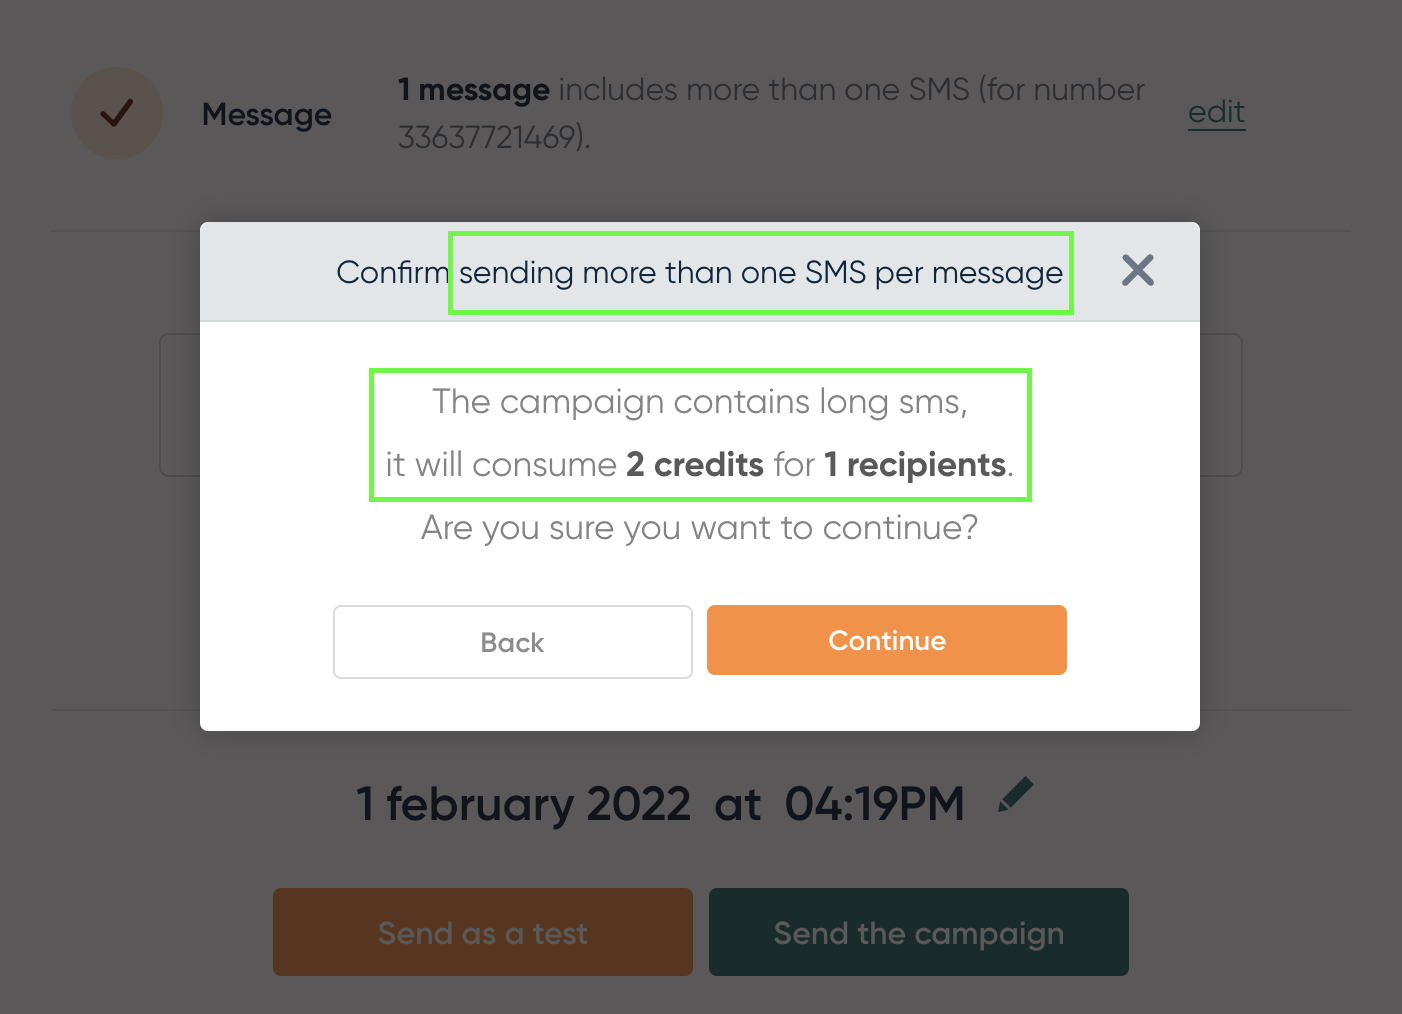 How SMSBump Calculates the SMS Count and Characters - SMSBump Blog